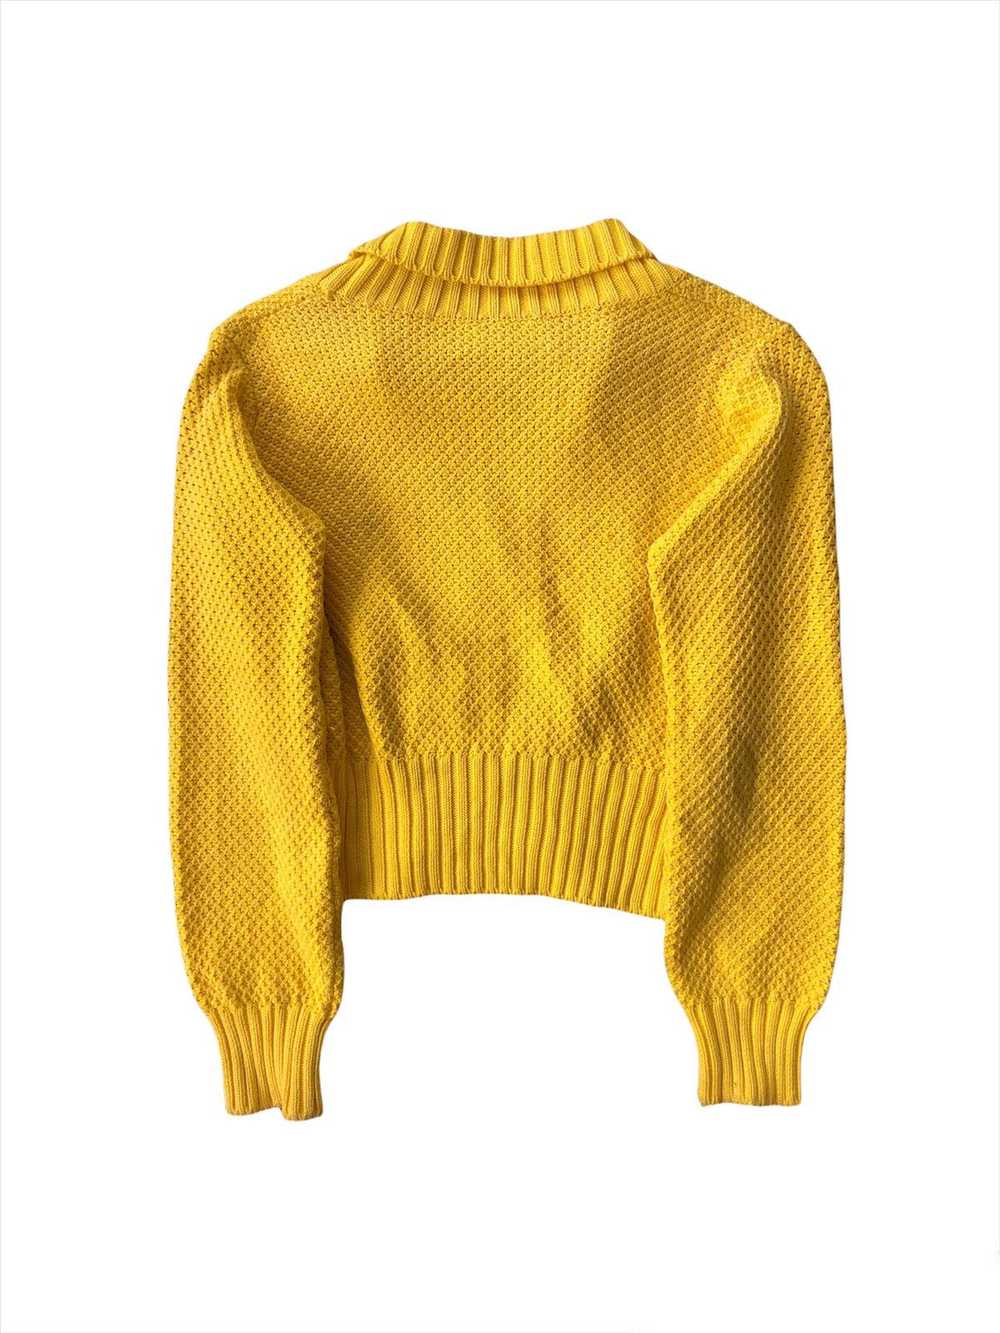 Coloured Cable Knit Sweater × Vivienne Westwood 1… - image 2